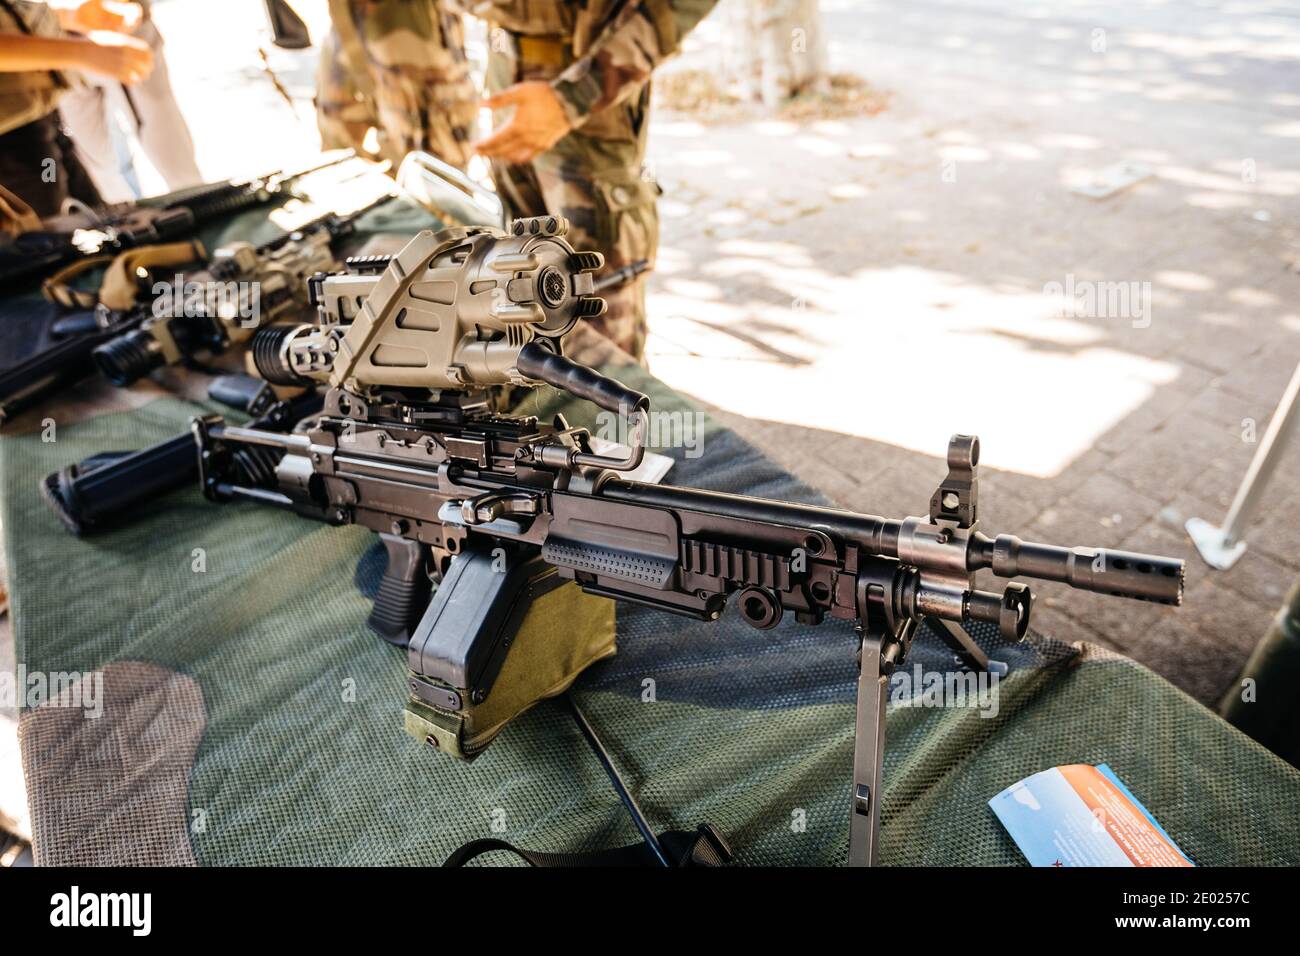 Strasbourg, France - Sep 21, 2019: Presentation of multiple Heckler and Koch HK416 assault rifle designed and manufactured by the German company with Stock Photo